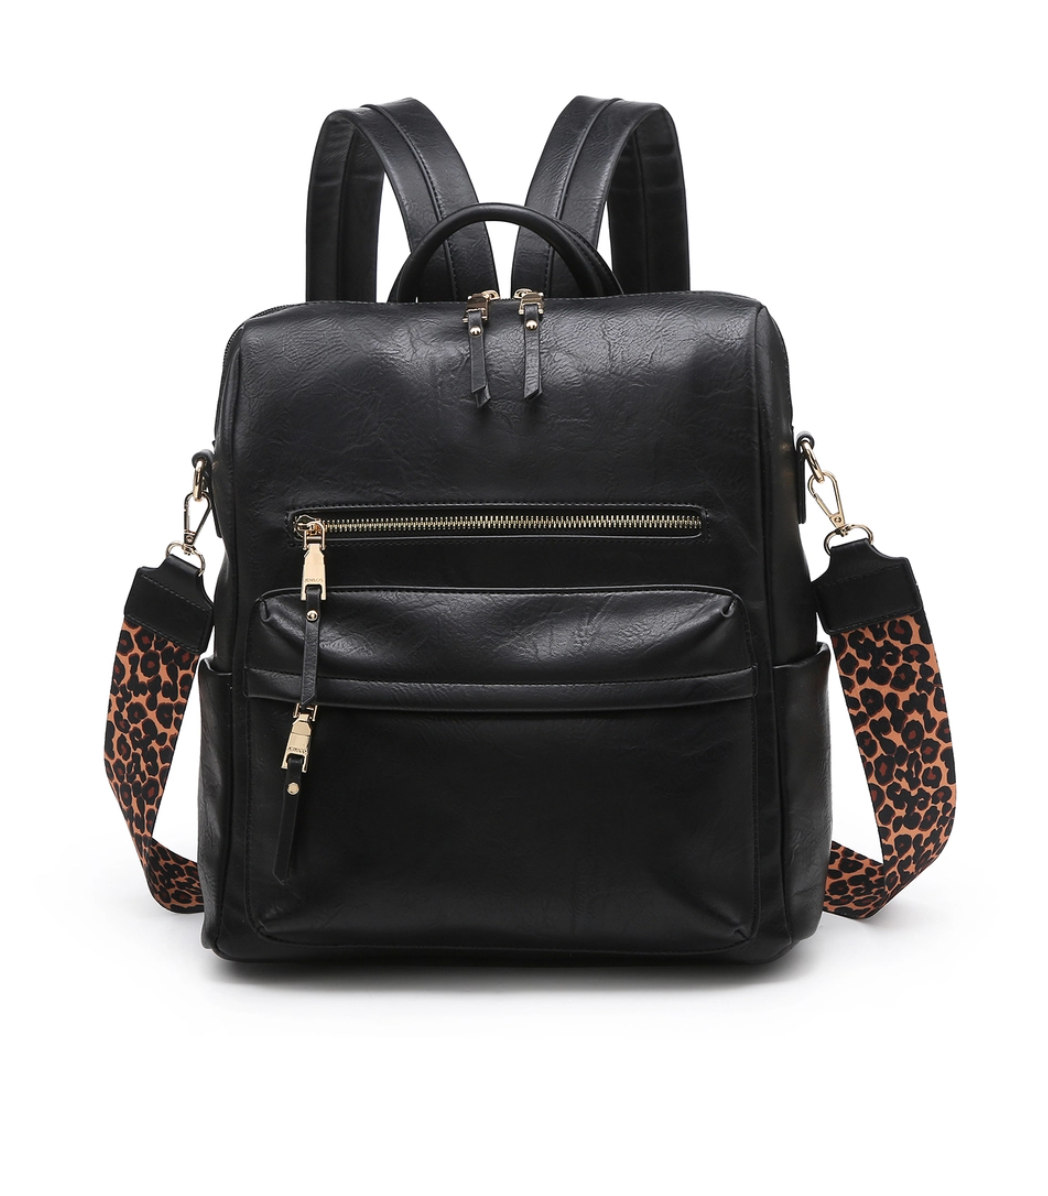 Vegan Leather Convertible Backpack with Guitar Strap - 9 Colors